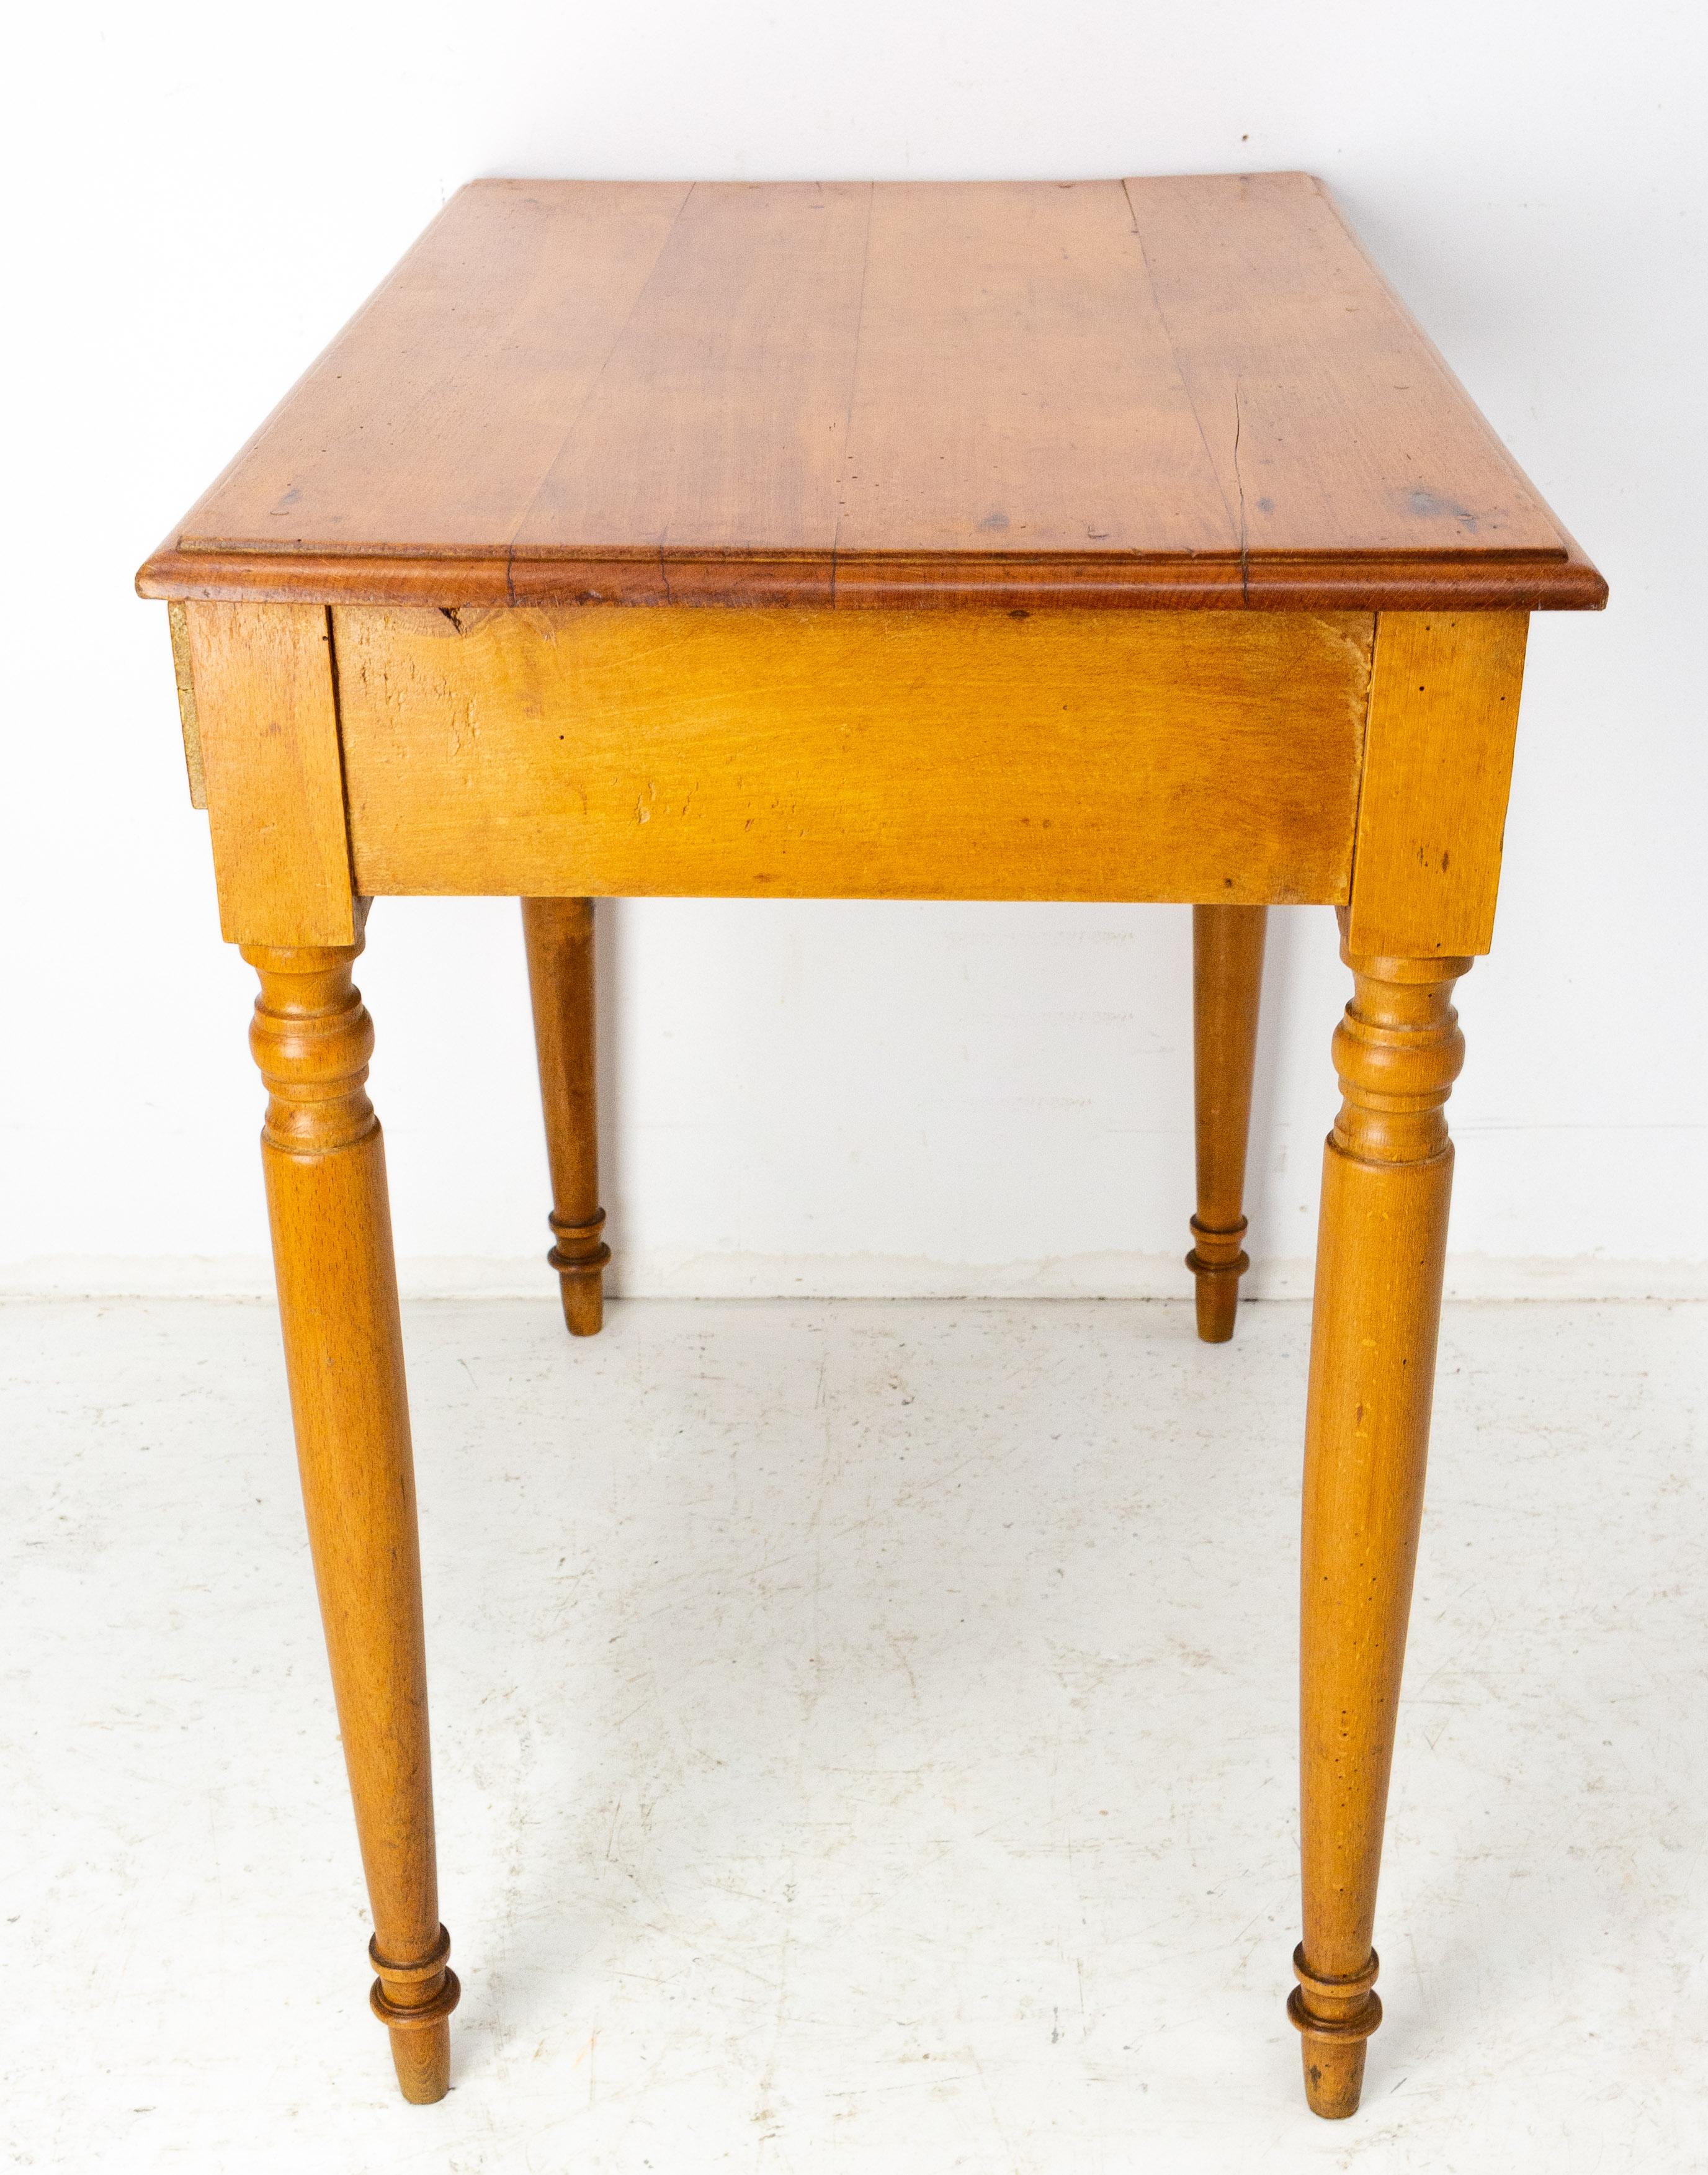 French Art Nouveau Beech Writing Table, Desk or Side Table, circa 1900 For Sale 2